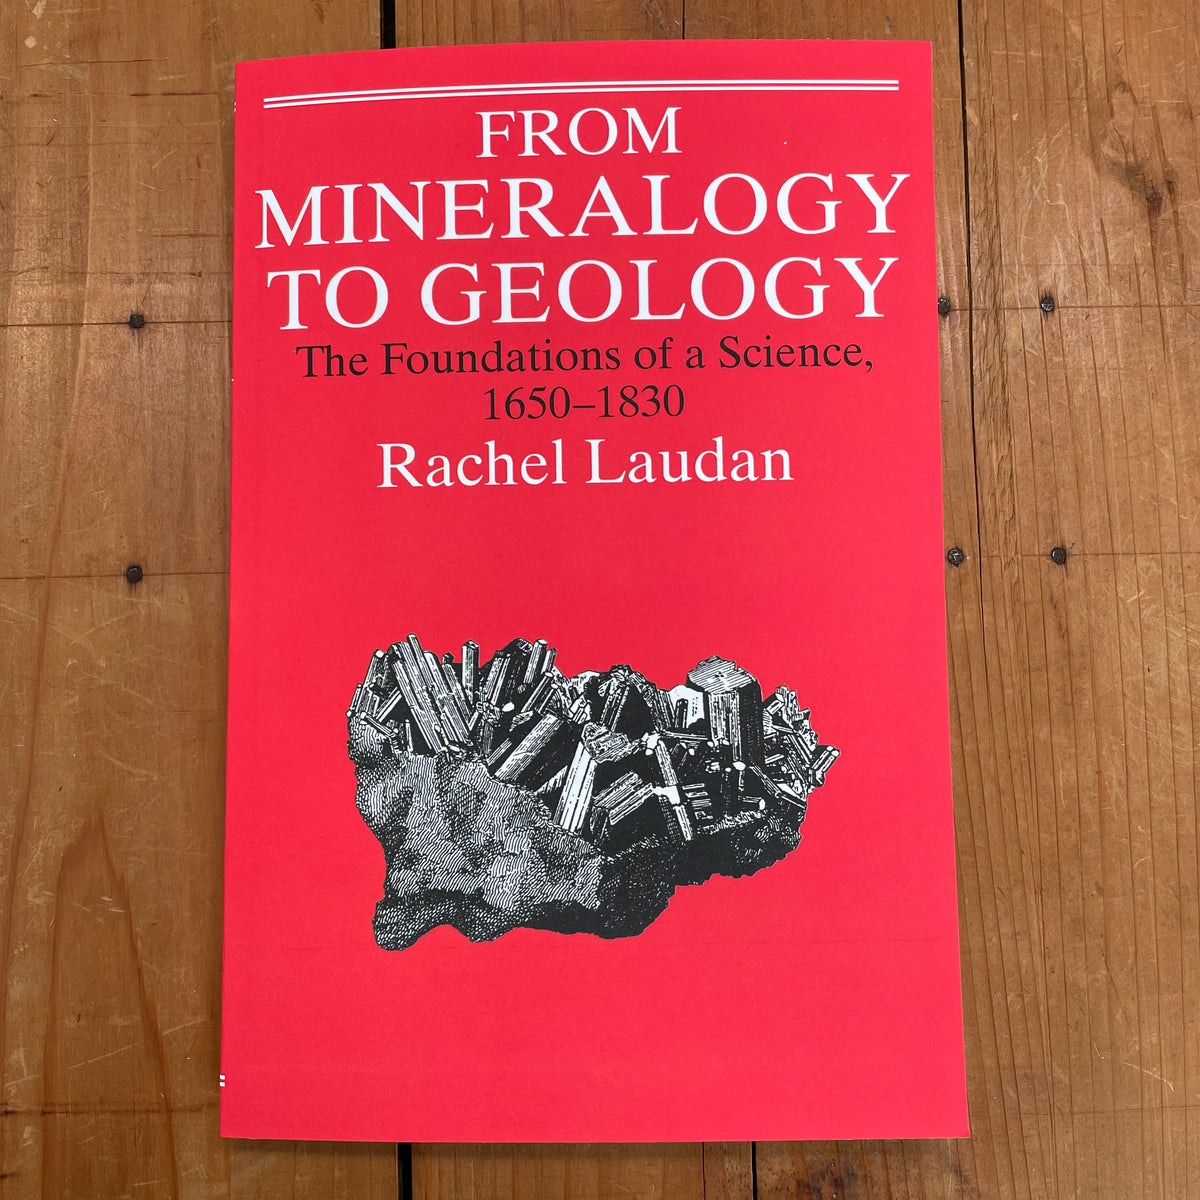 From Mineralogy to Geology: The Foundations of a Science, 1650-1830 - Rachel Laudan